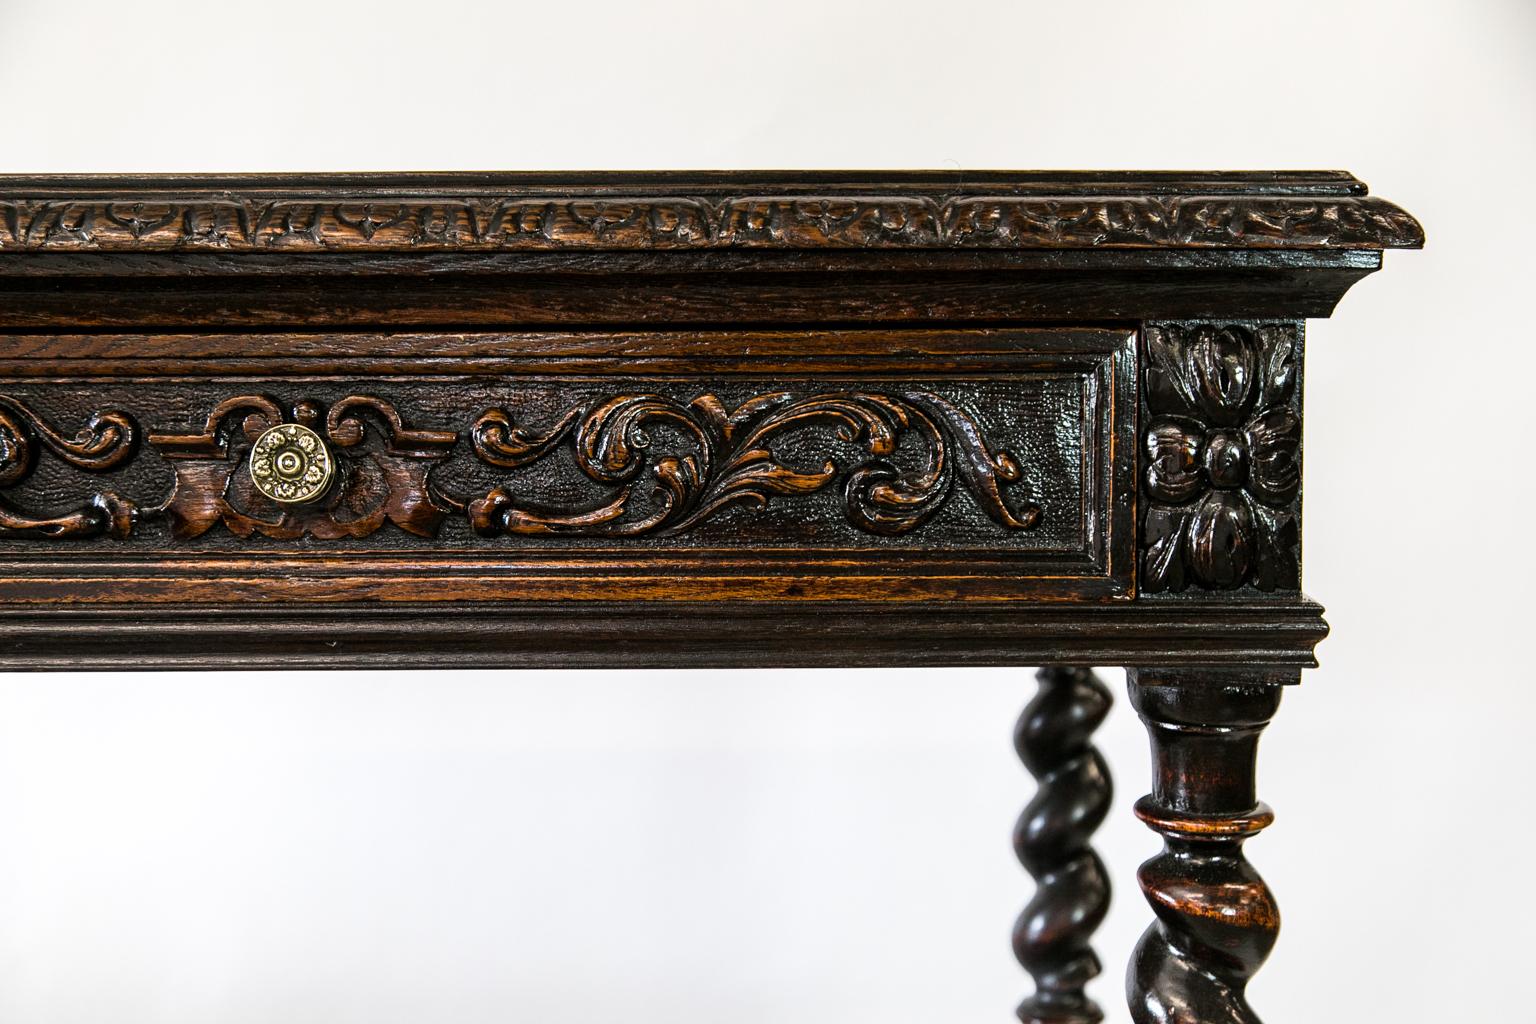 This English oak two tiered server/cabinet has heavy carved top molding. The drawer has floral arabesques carved in high relief. The lower cabinet door has leaf, vine, and fruit carvings, and carved bell flower swags on the lower stiles. The top